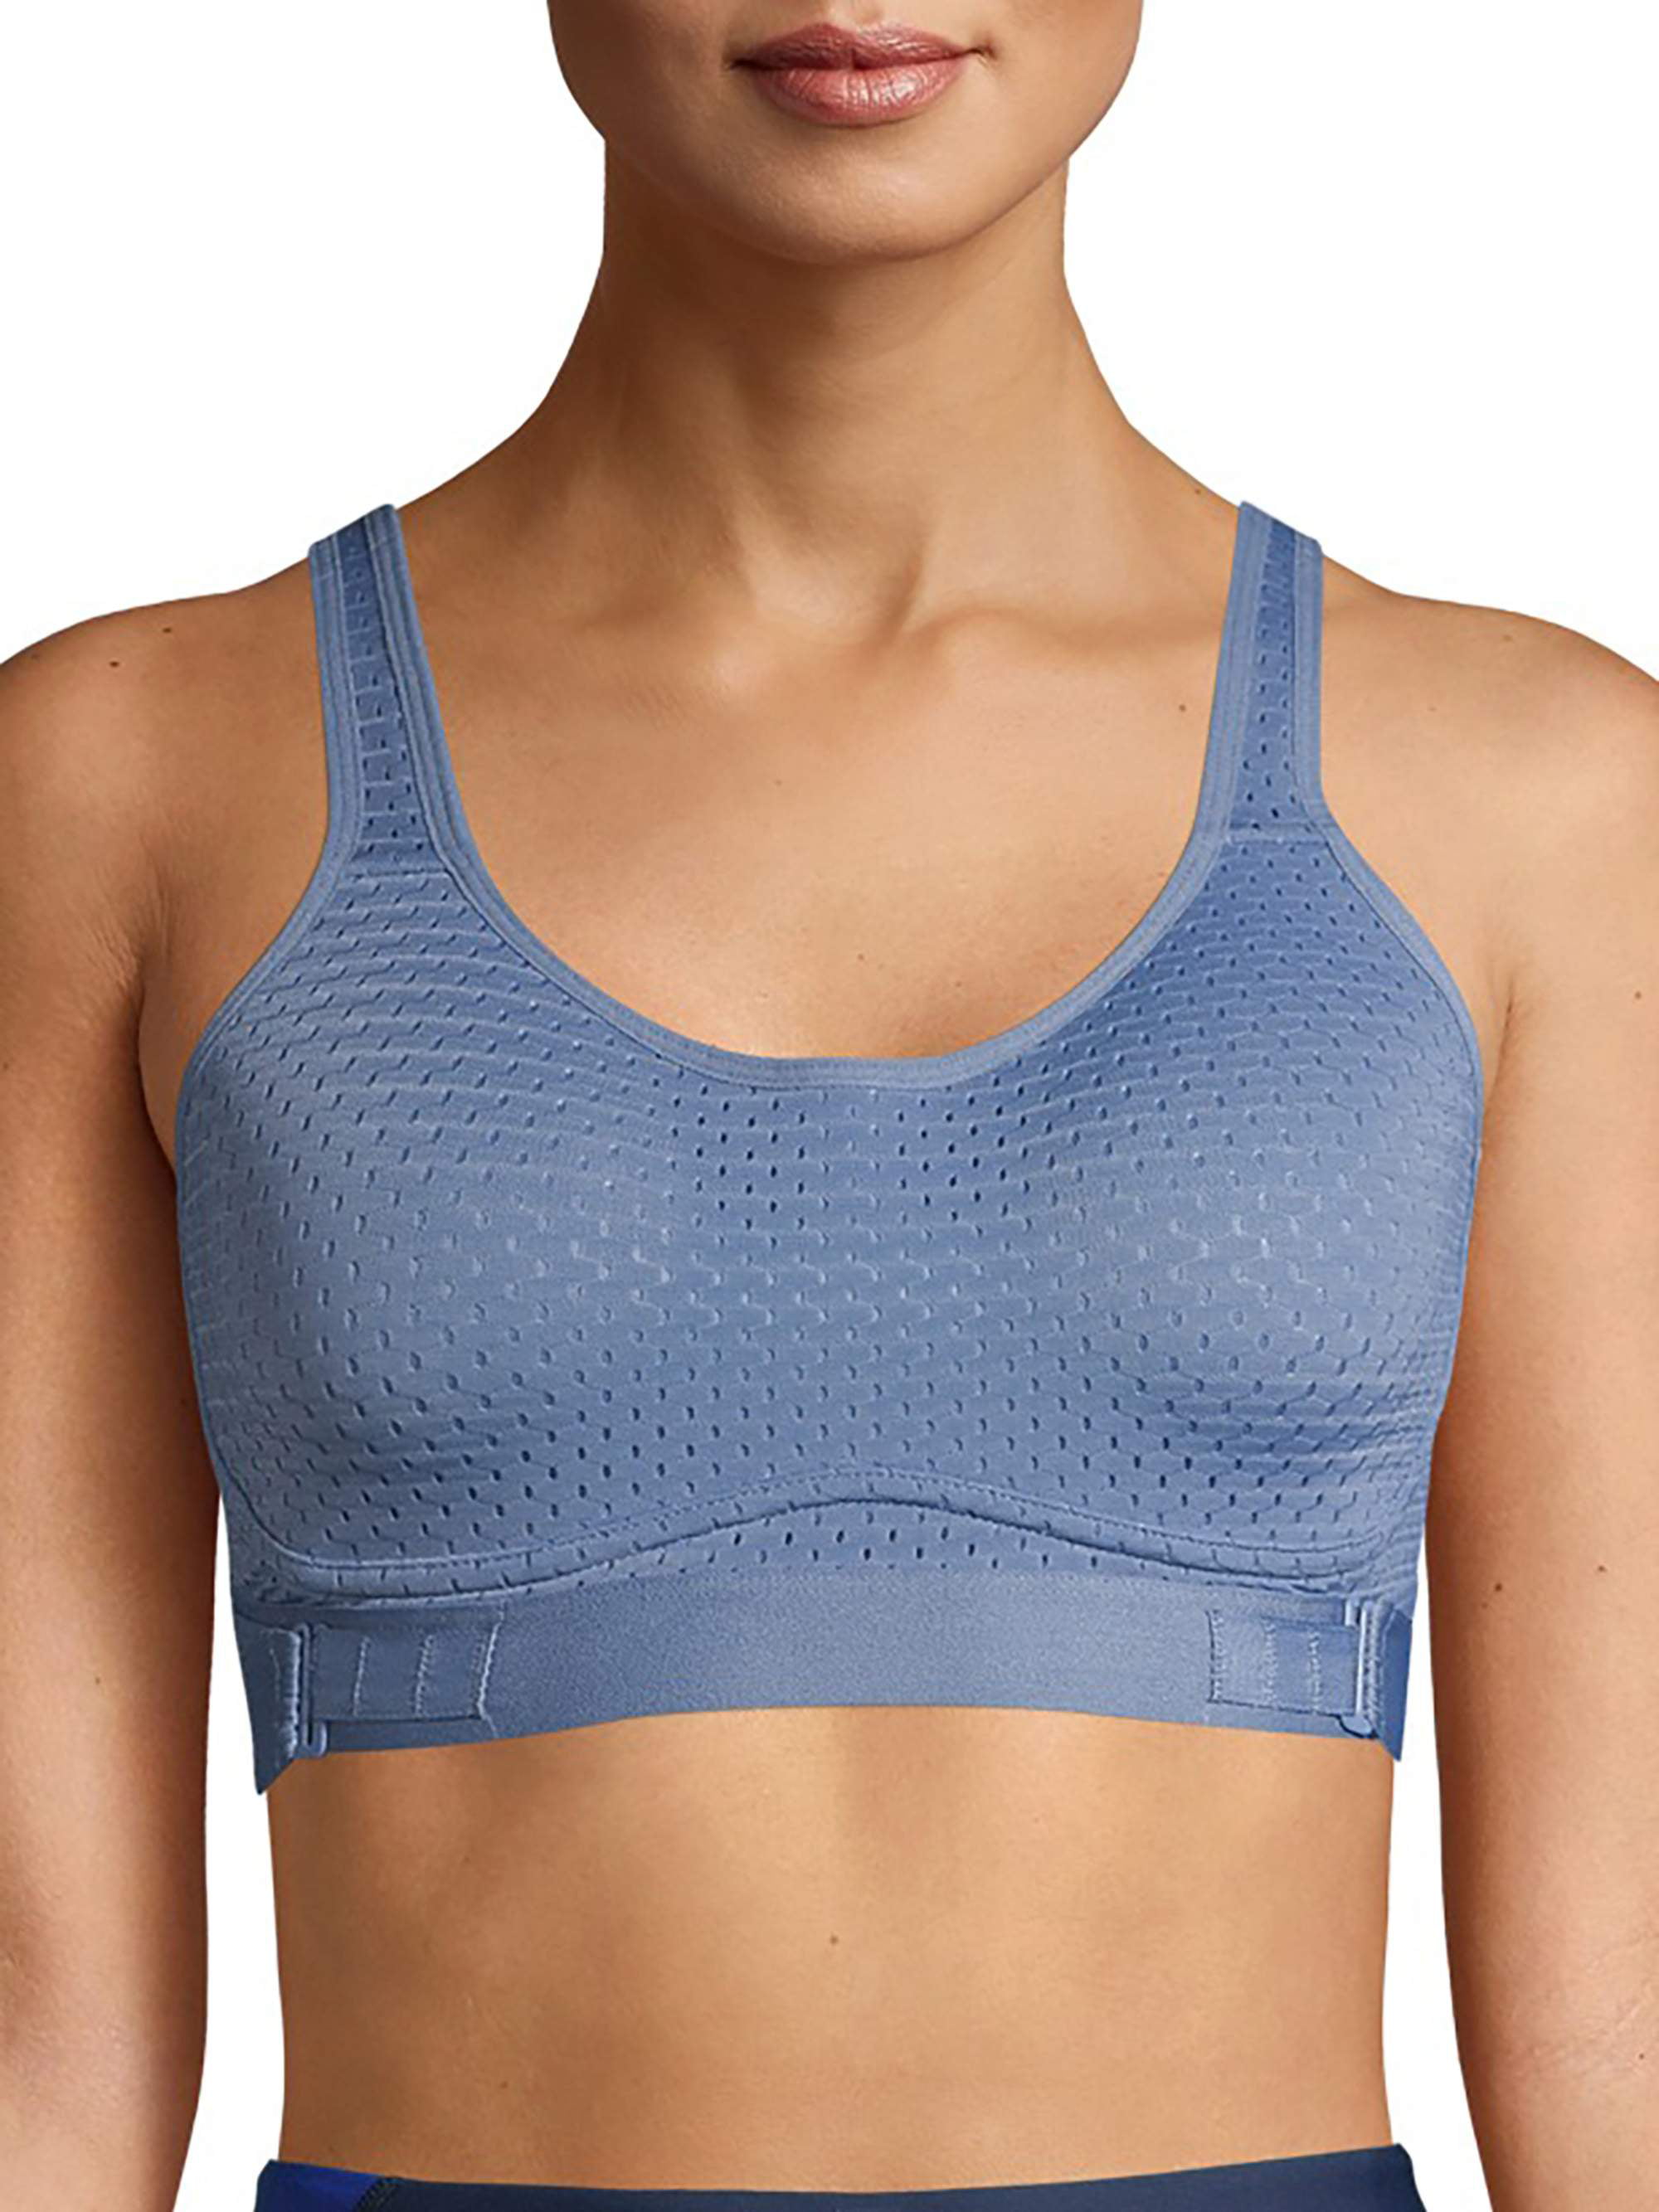 Layer 8 New Womens Performance Max Support Sports Bra